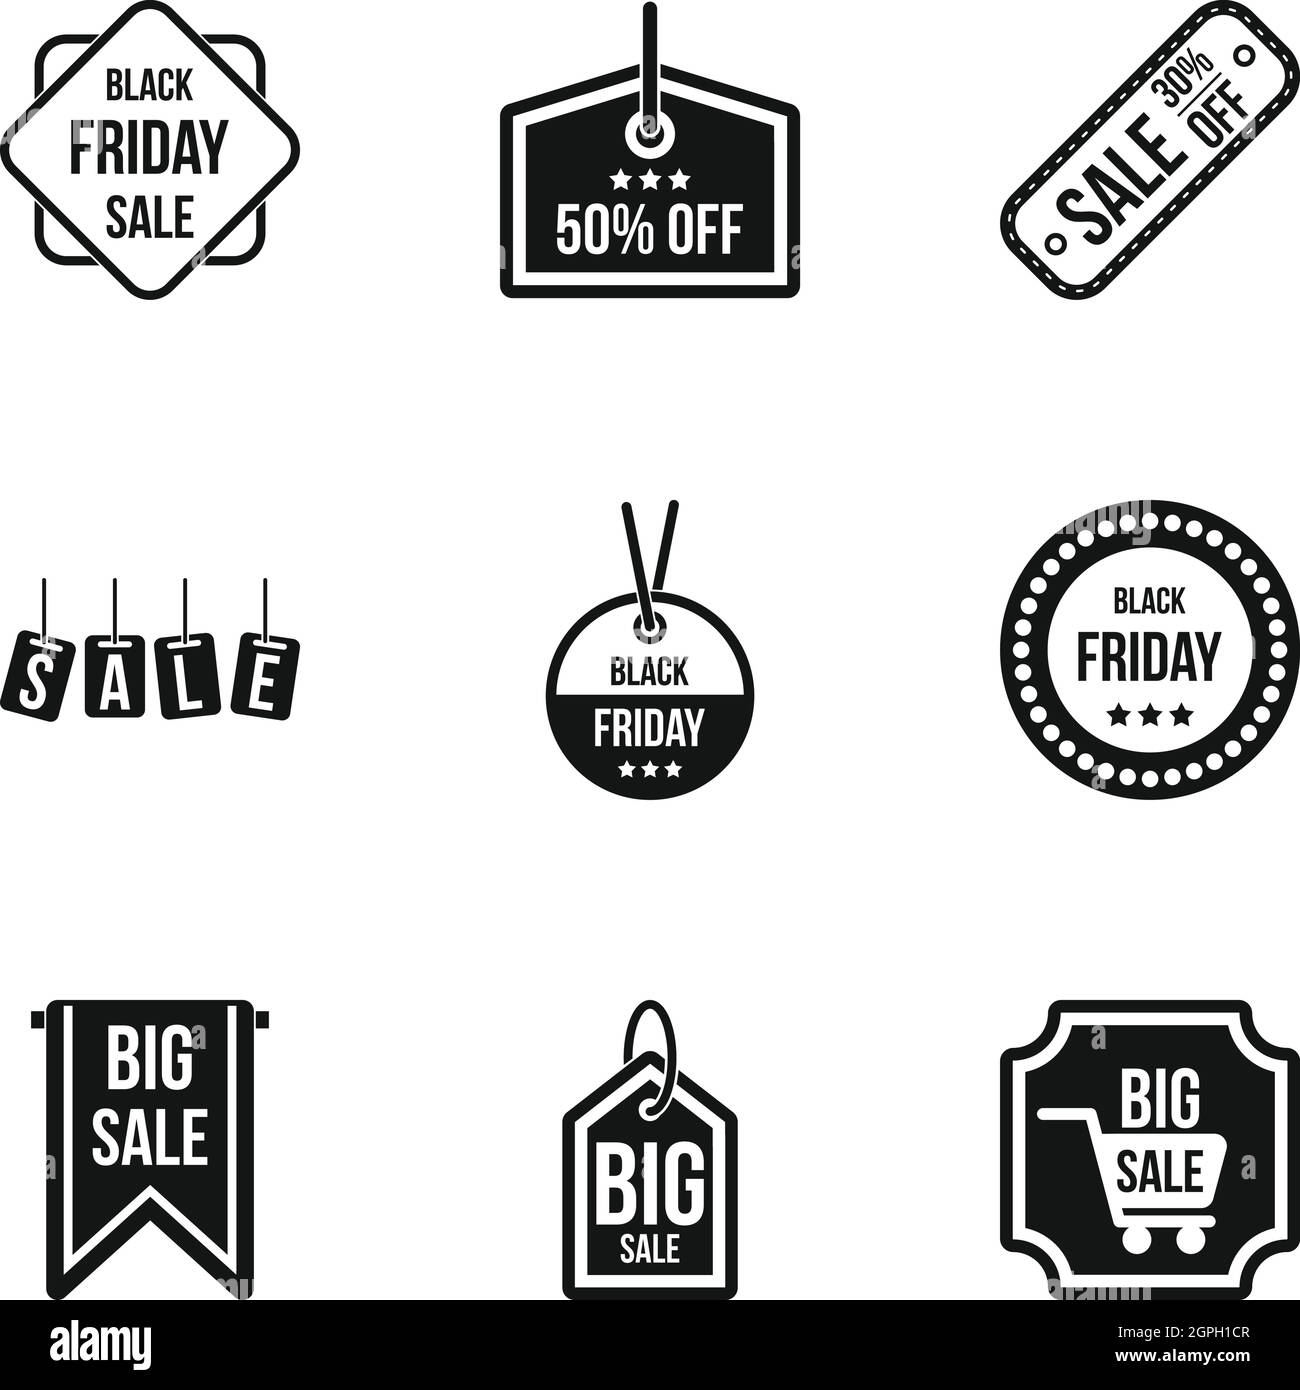 Black friday icons set, simple style Stock Vector